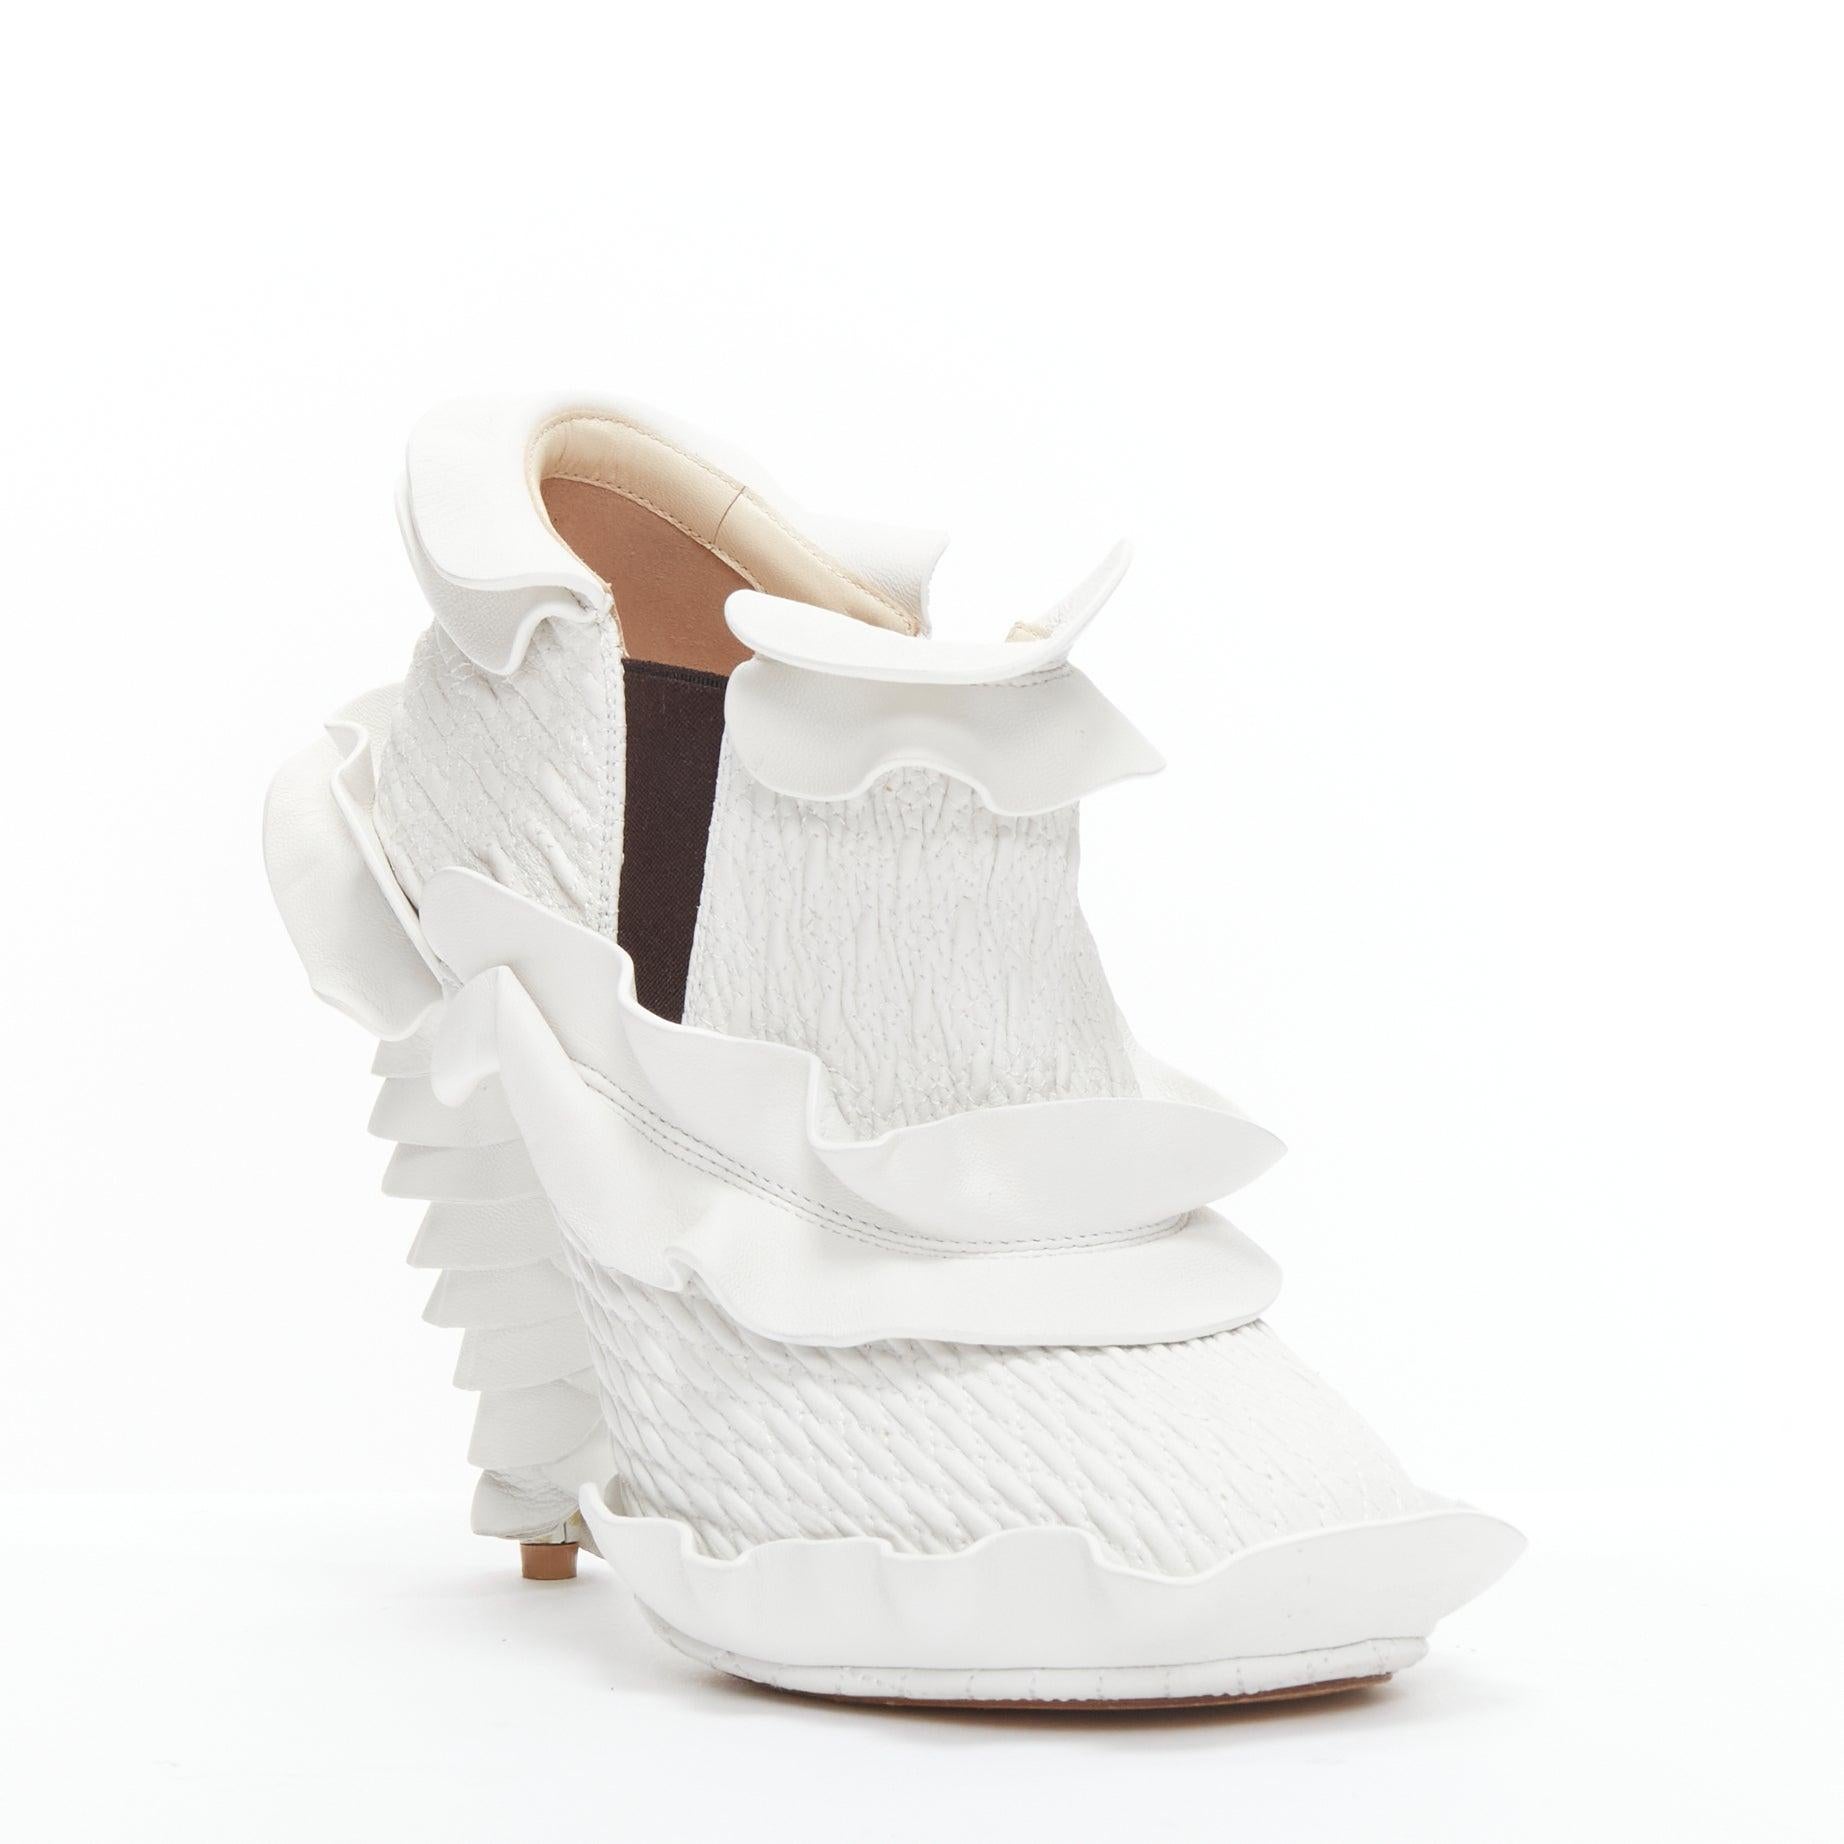 FENDI Runway white textured leather ruffle tiered cone heels booties EU38
Reference: TGAS/D00648
Brand: Fendi
Collection: 2016 - Runway
Material: Leather
Color: White
Pattern: Solid
Closure: Elasticated
Lining: Nude Leather
Extra Details: